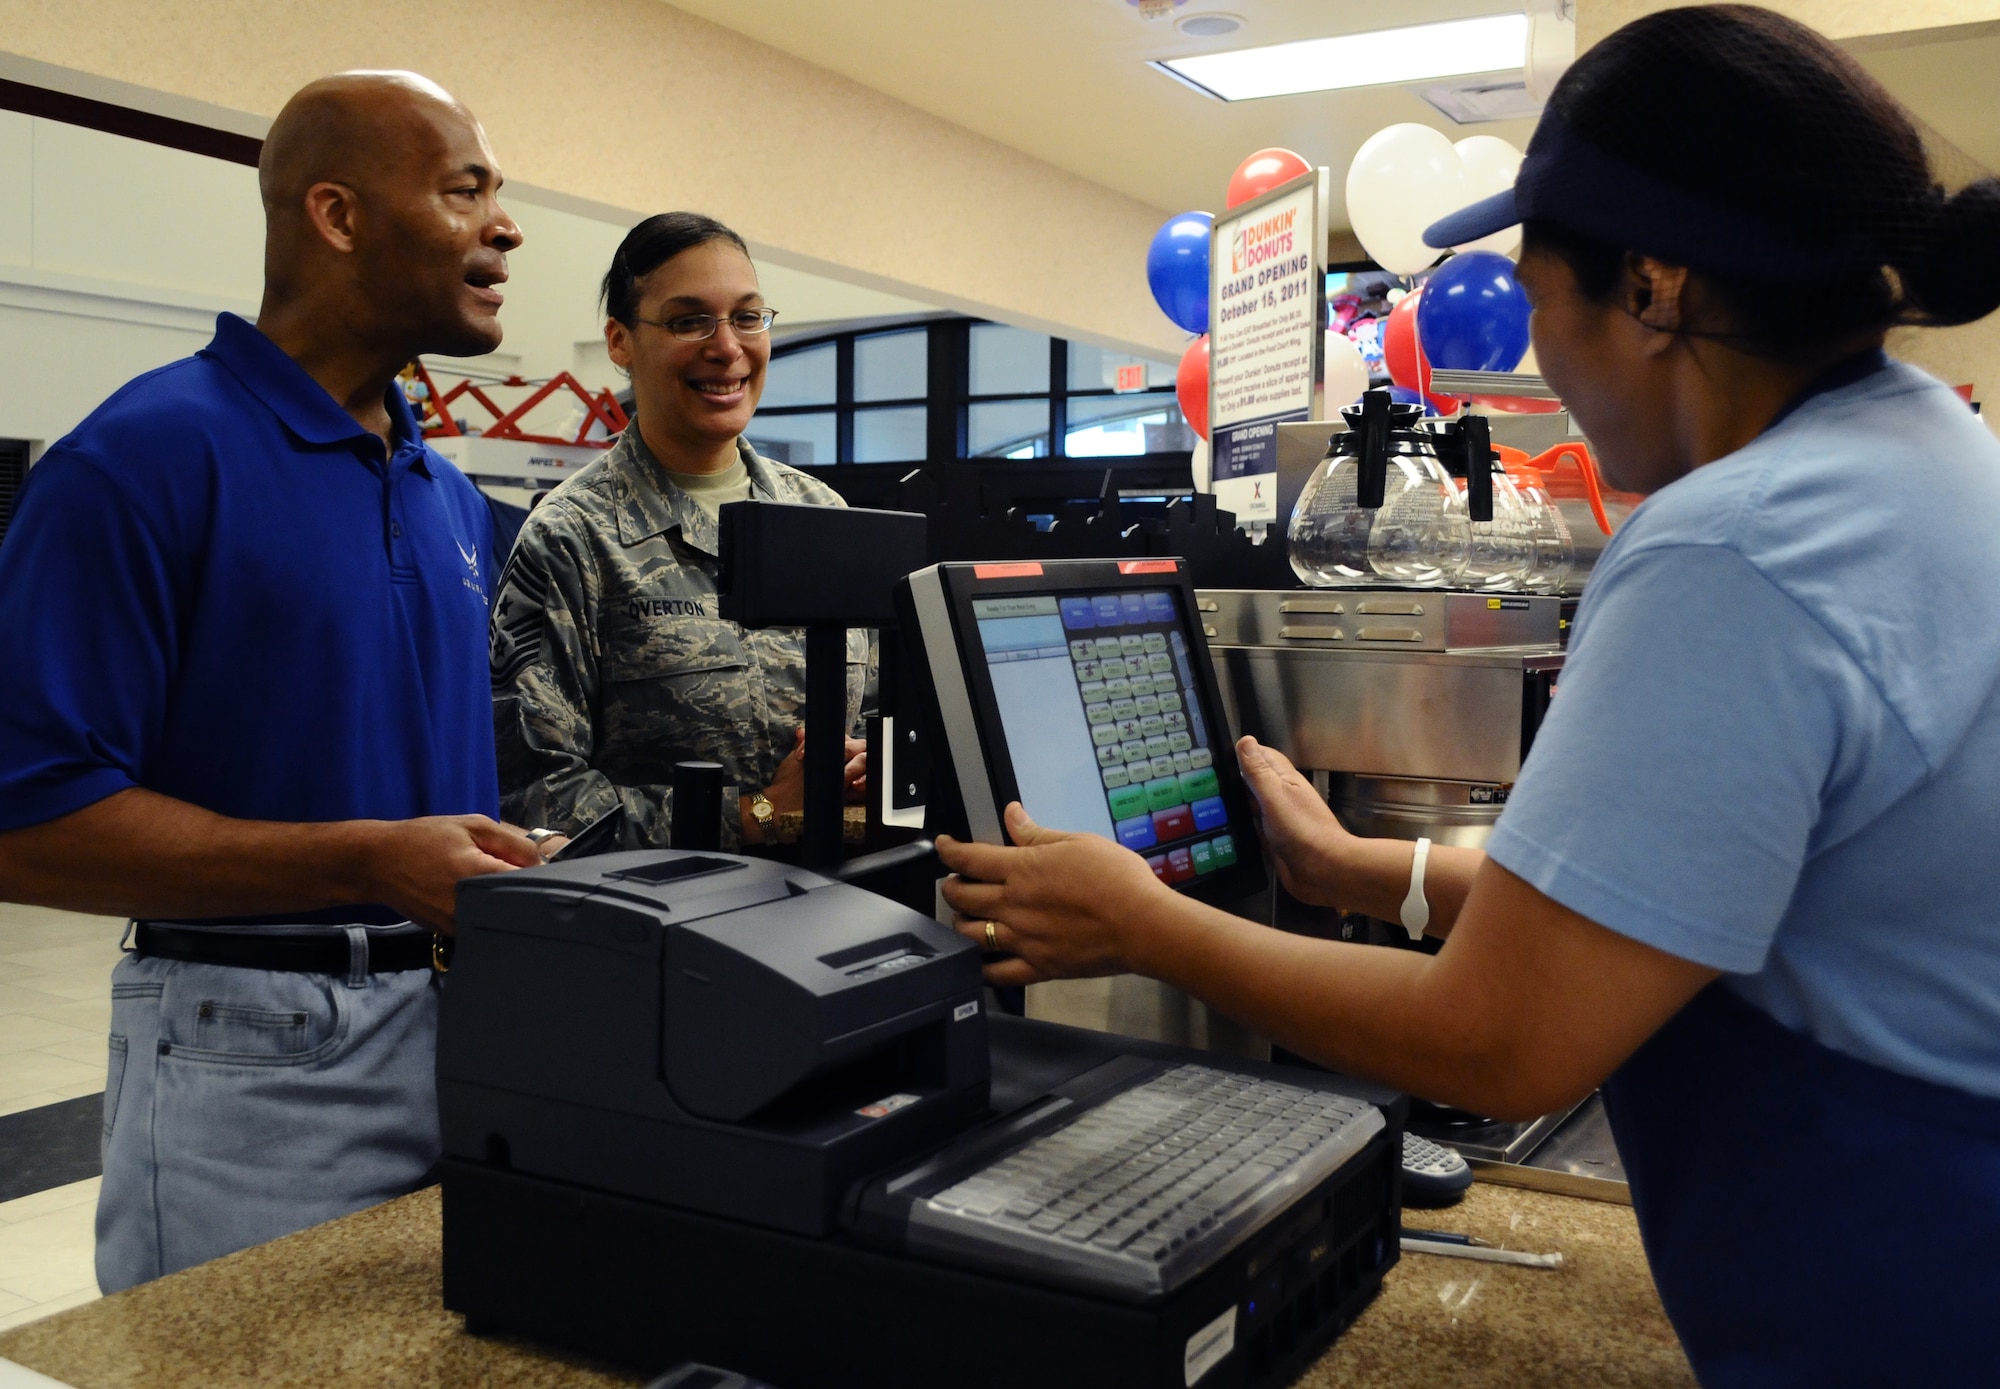 ANDERSEN AIR FORCE BASE, Guam—Chief Master Sgt. Margarita Overton, 36th Wing command chief, orders coffee with her husband, Mark during the grand opening of the Duncan Donuts coffee shop here, Oct. 14. The Army and Air Force Exchange Service (AAFES) put in the new store to improve the quality of life for Airmen at Andersen. (U.S. Air Force photo by Senior Airman Benjamin Wiseman/Released)